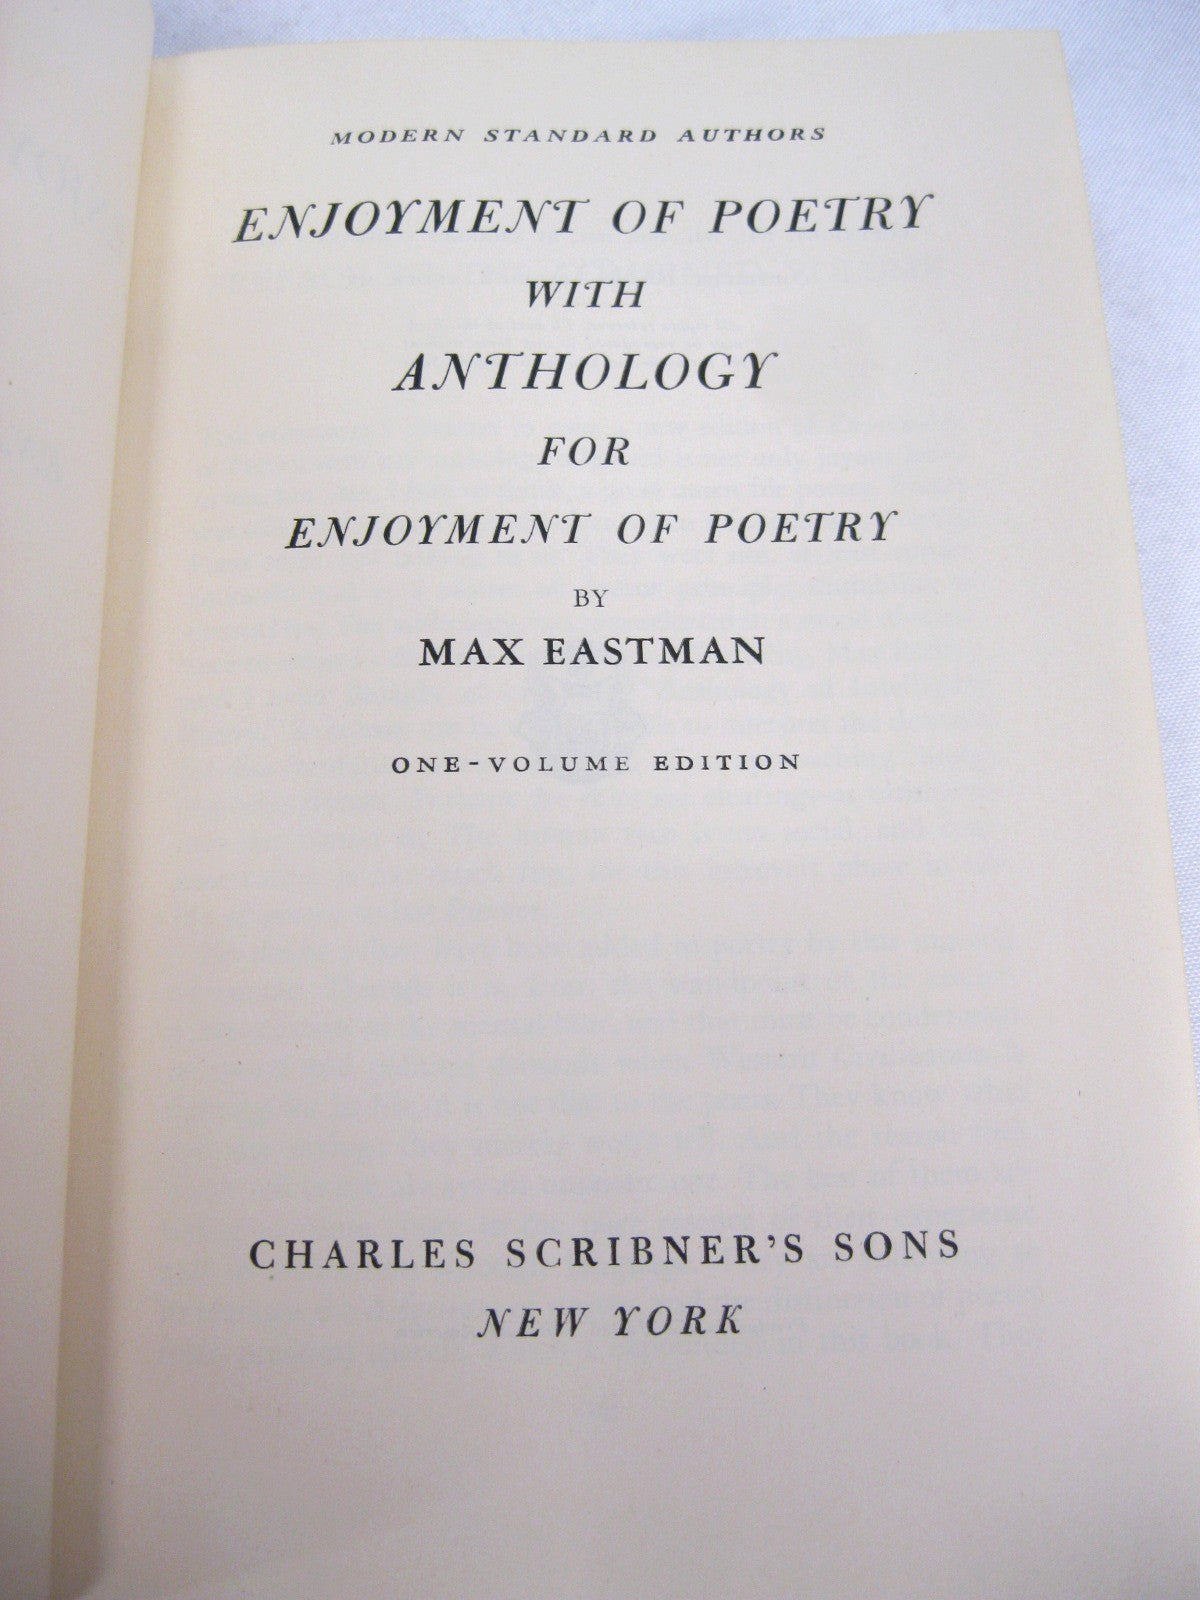 Enjoyment of Poetry Anthology by Max Eastman